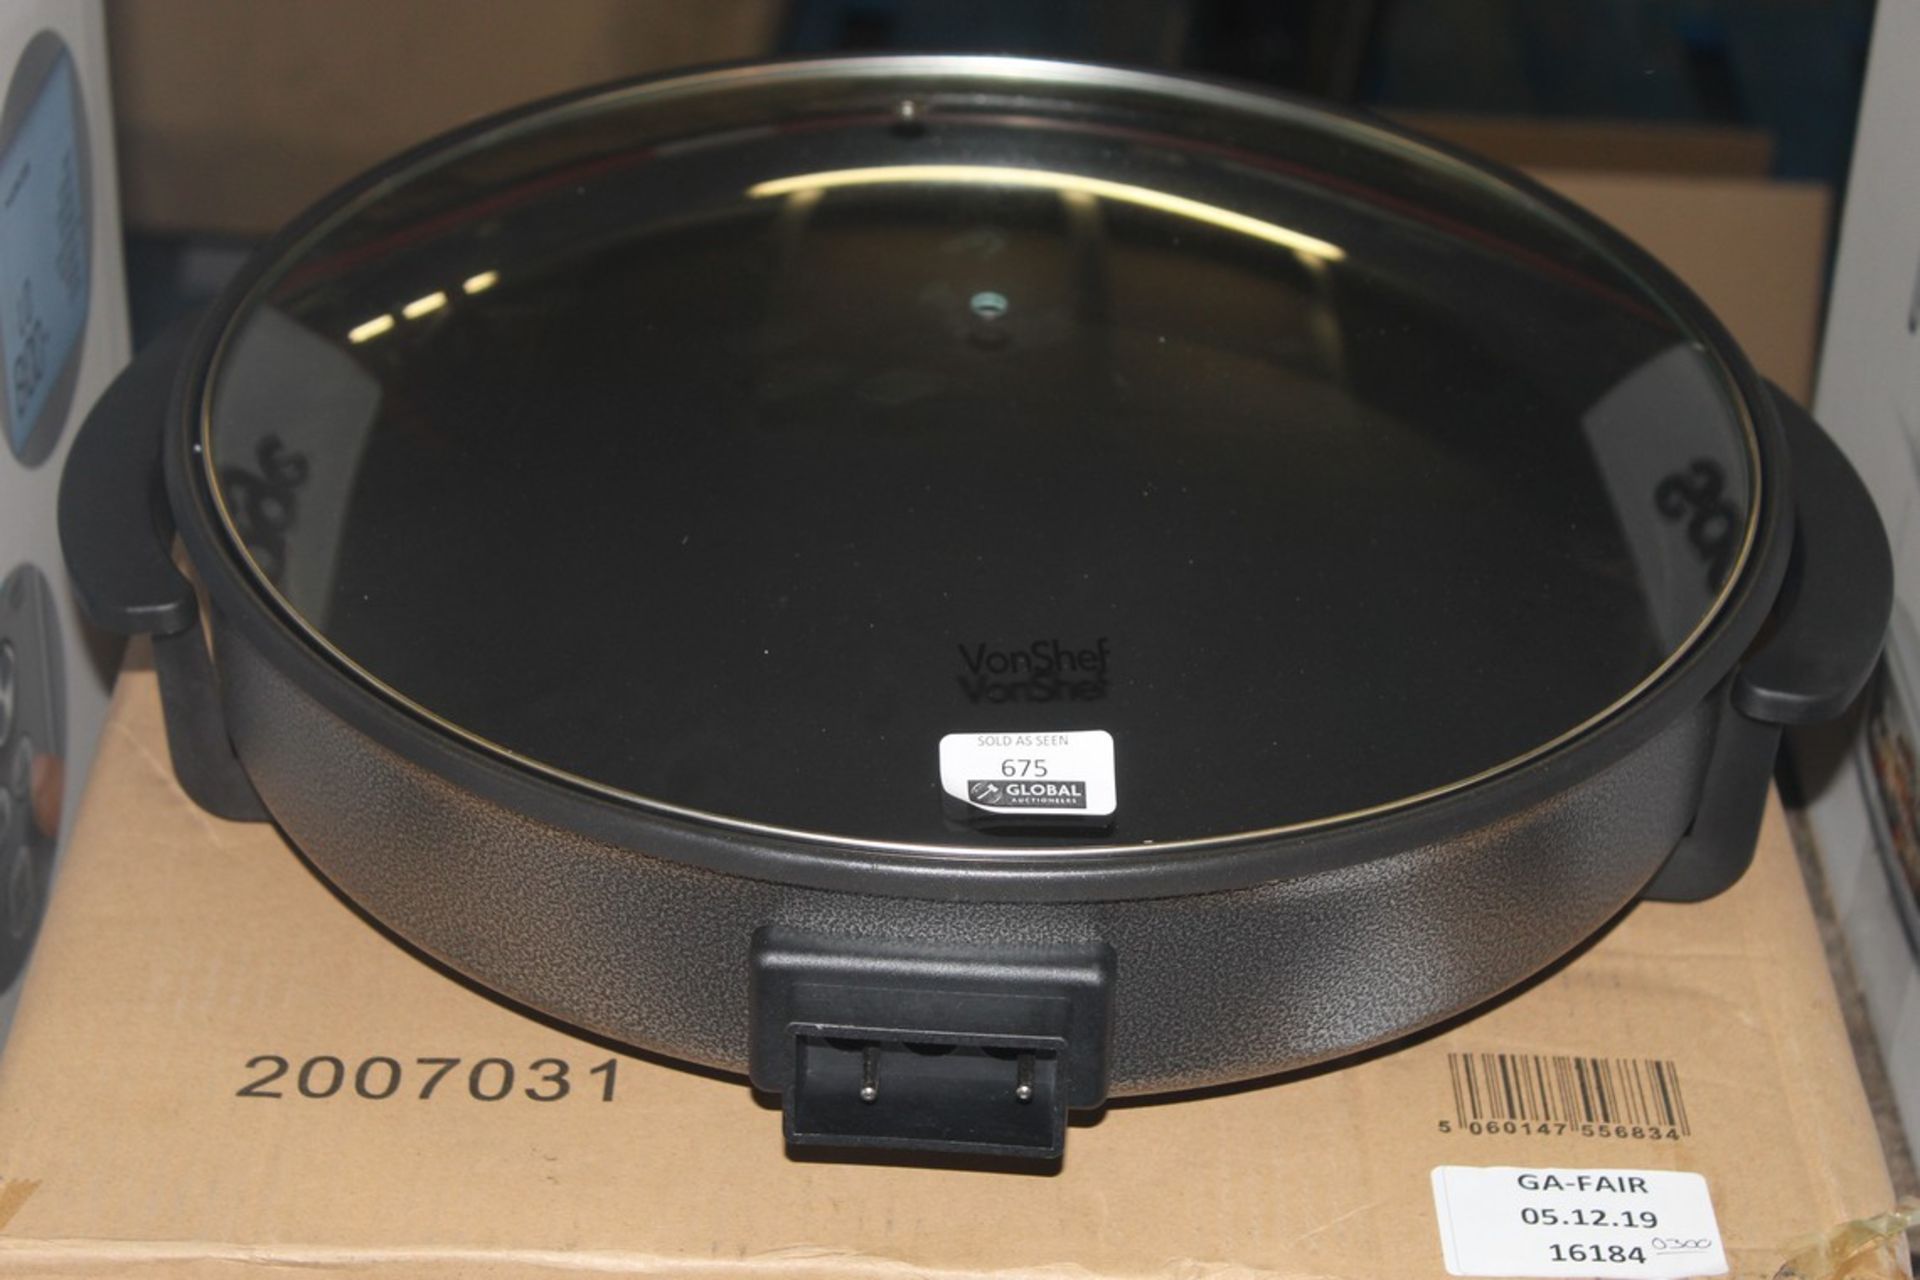 Boxed Vonshef Electric Paella Pan RRP £60 (16184) (Public Viewing and Appraisals Available)